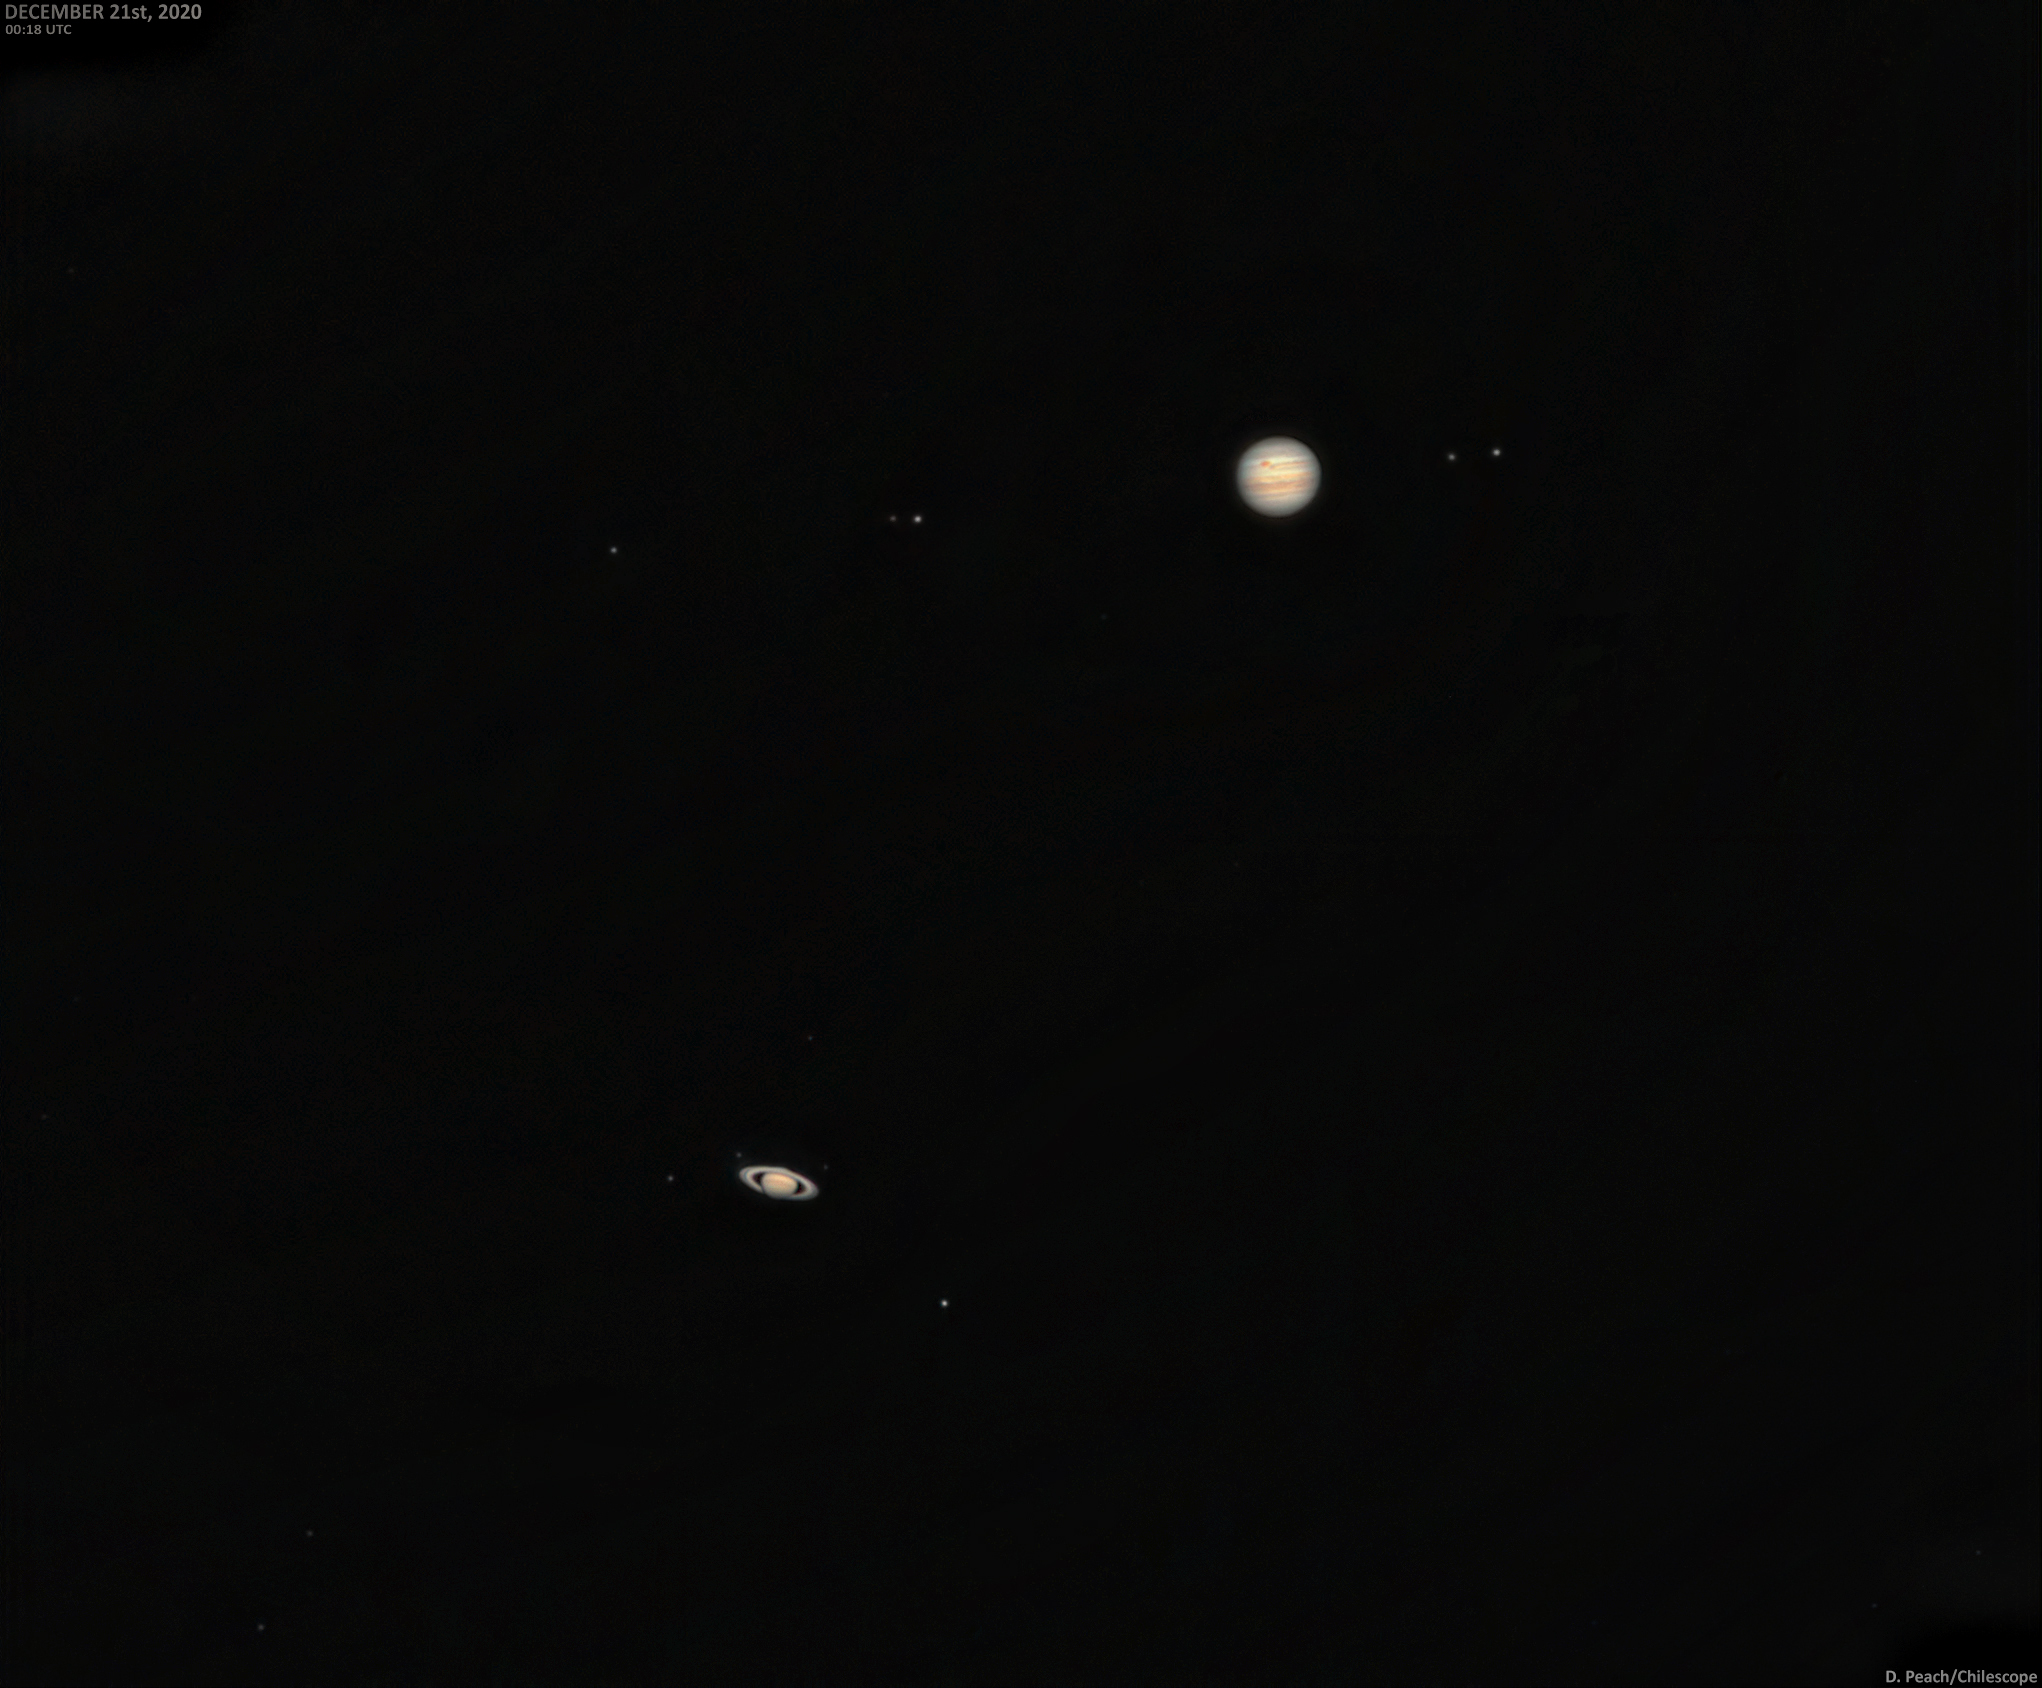 Damian Peach on Twitter: "#jupitersaturnconjunction on Dec 21st at 00:18UT. https://t.co/3RtfDFD1Yw A combination of several exposures to reveal of both planets. The GRS is visible on Jupiter. Titan is seen